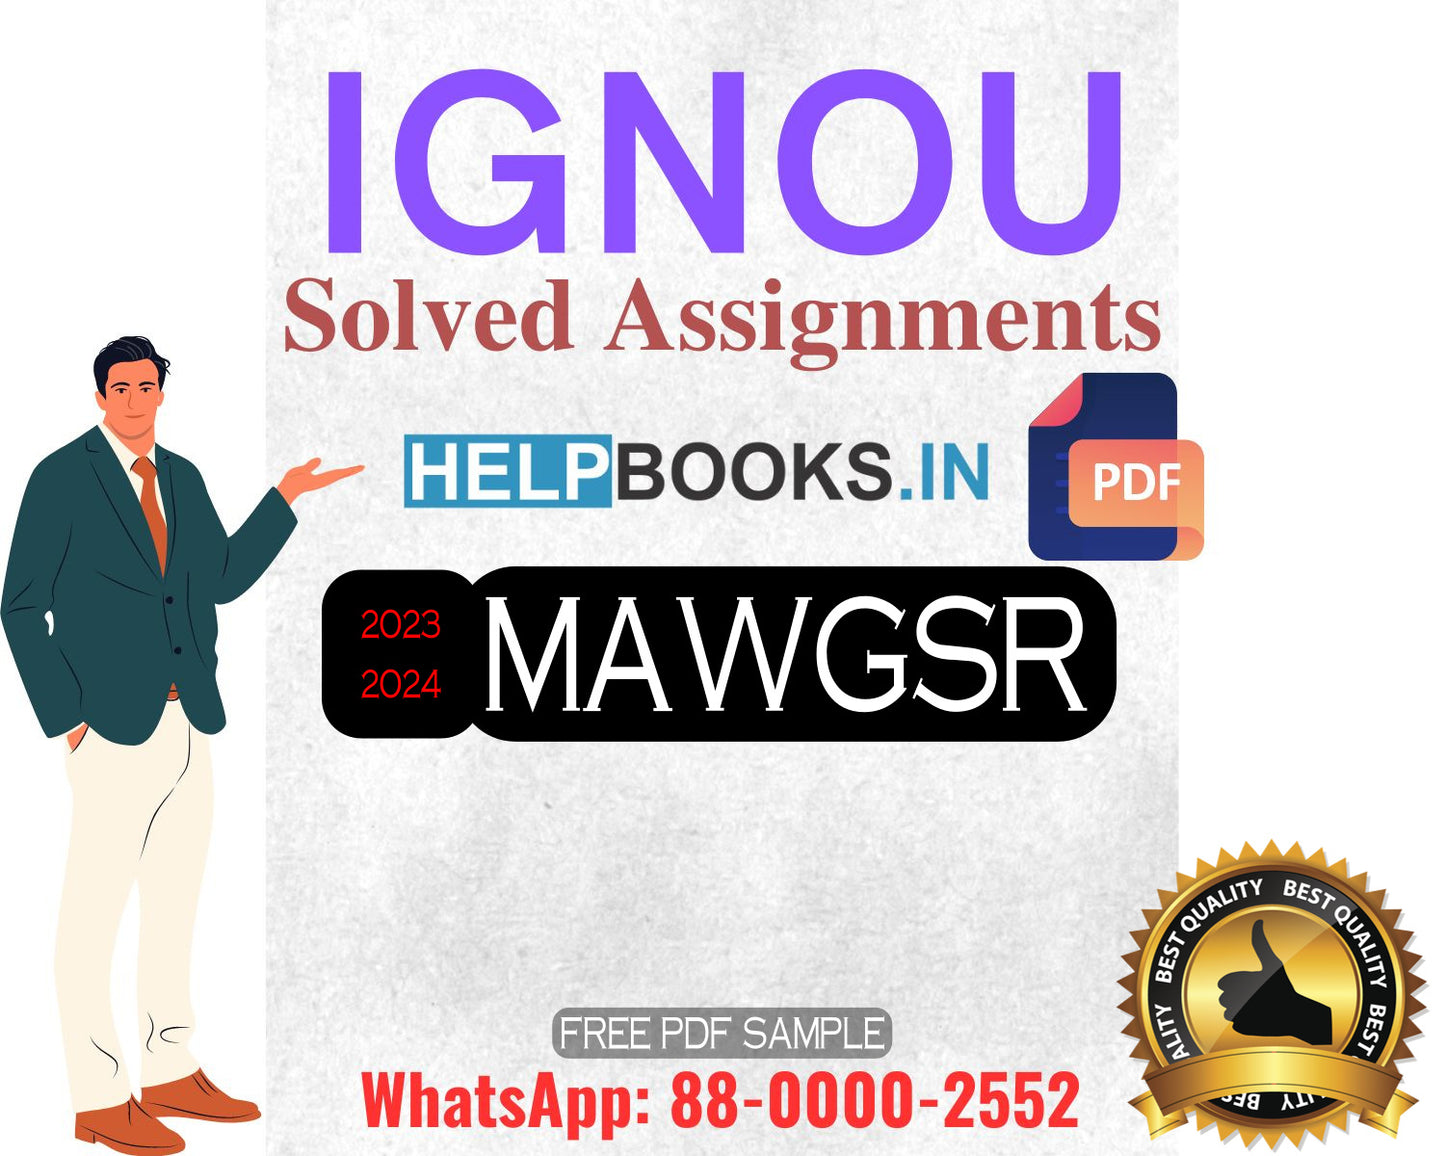 IGNOU Master's Degree Programme Latest IGNOU Solved Assignment 2023-24 & 2022-23 Sessions : MAWGSR Master of Arts Women and Gender Studies Solved Assignments